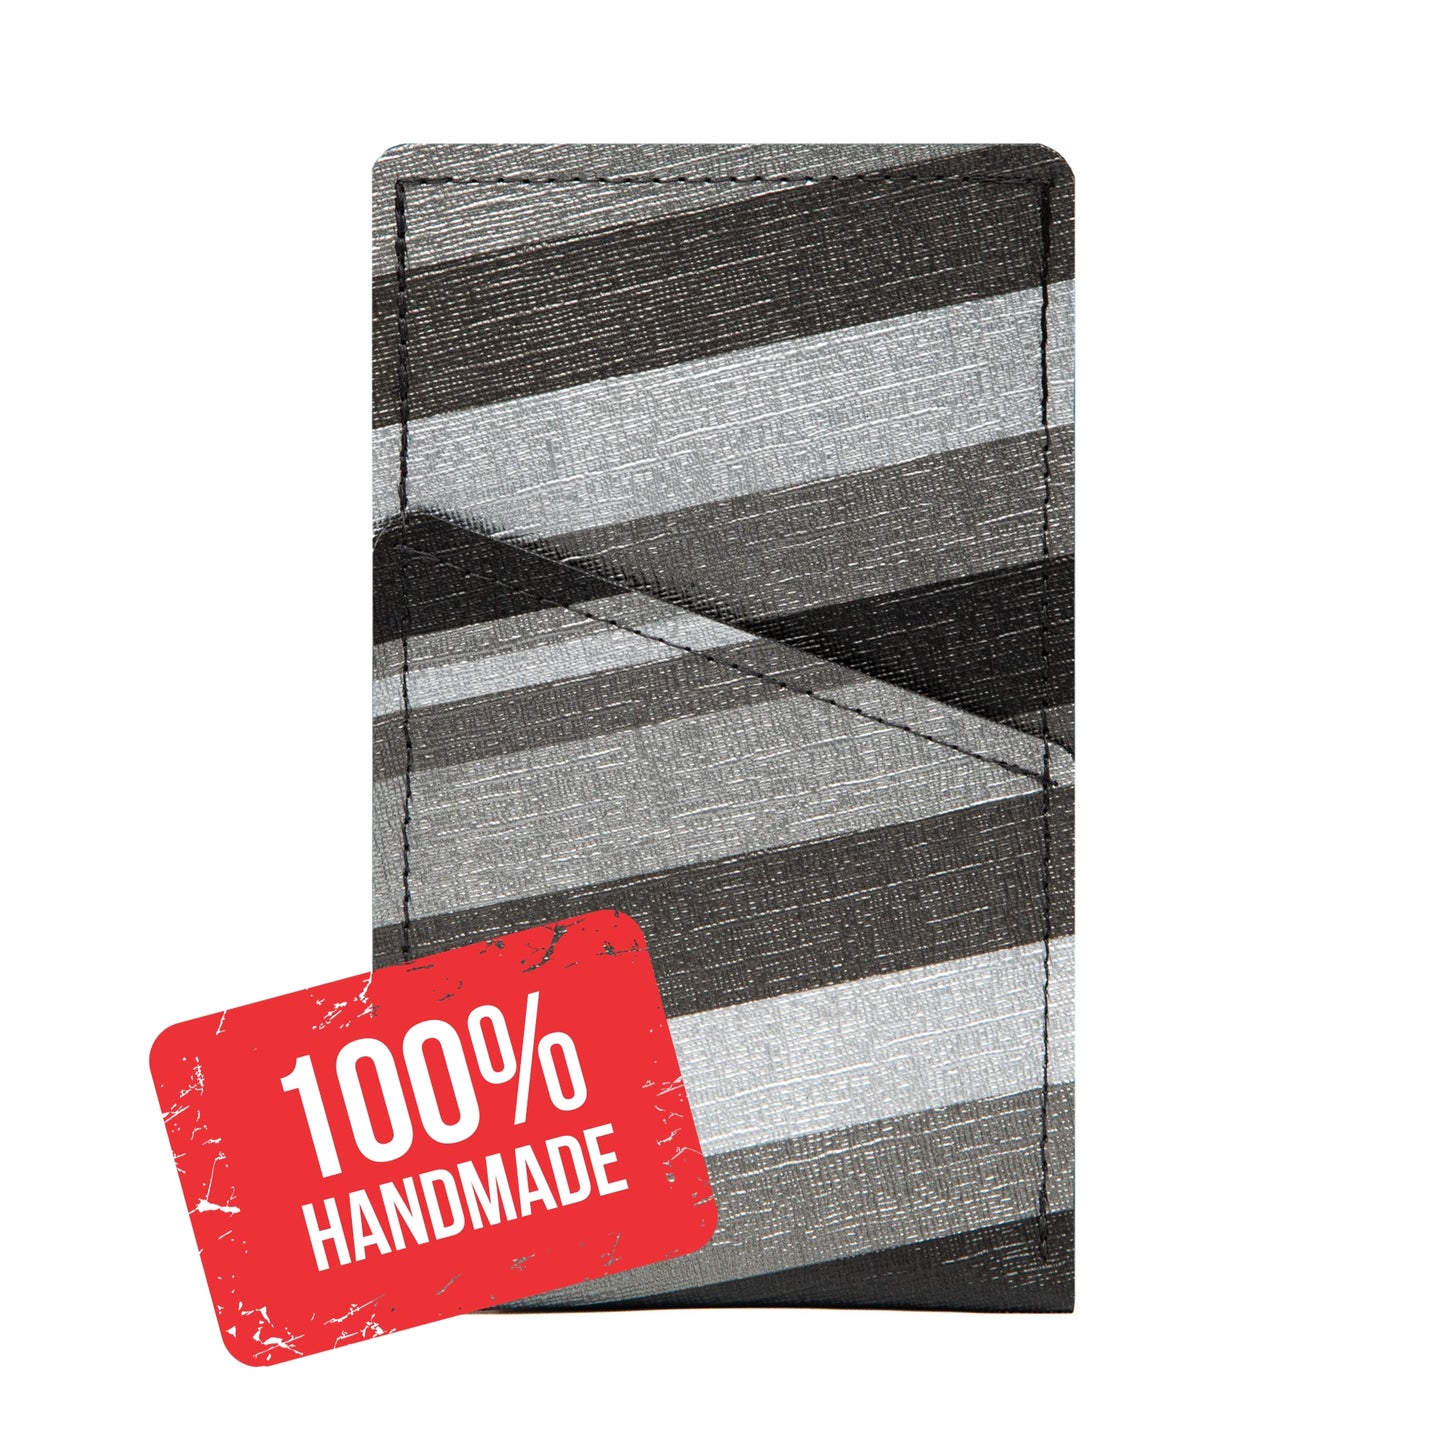 Modern Faux Leather iPhone Sleeve with Silver and Grey Patterned Design and Card Pocket